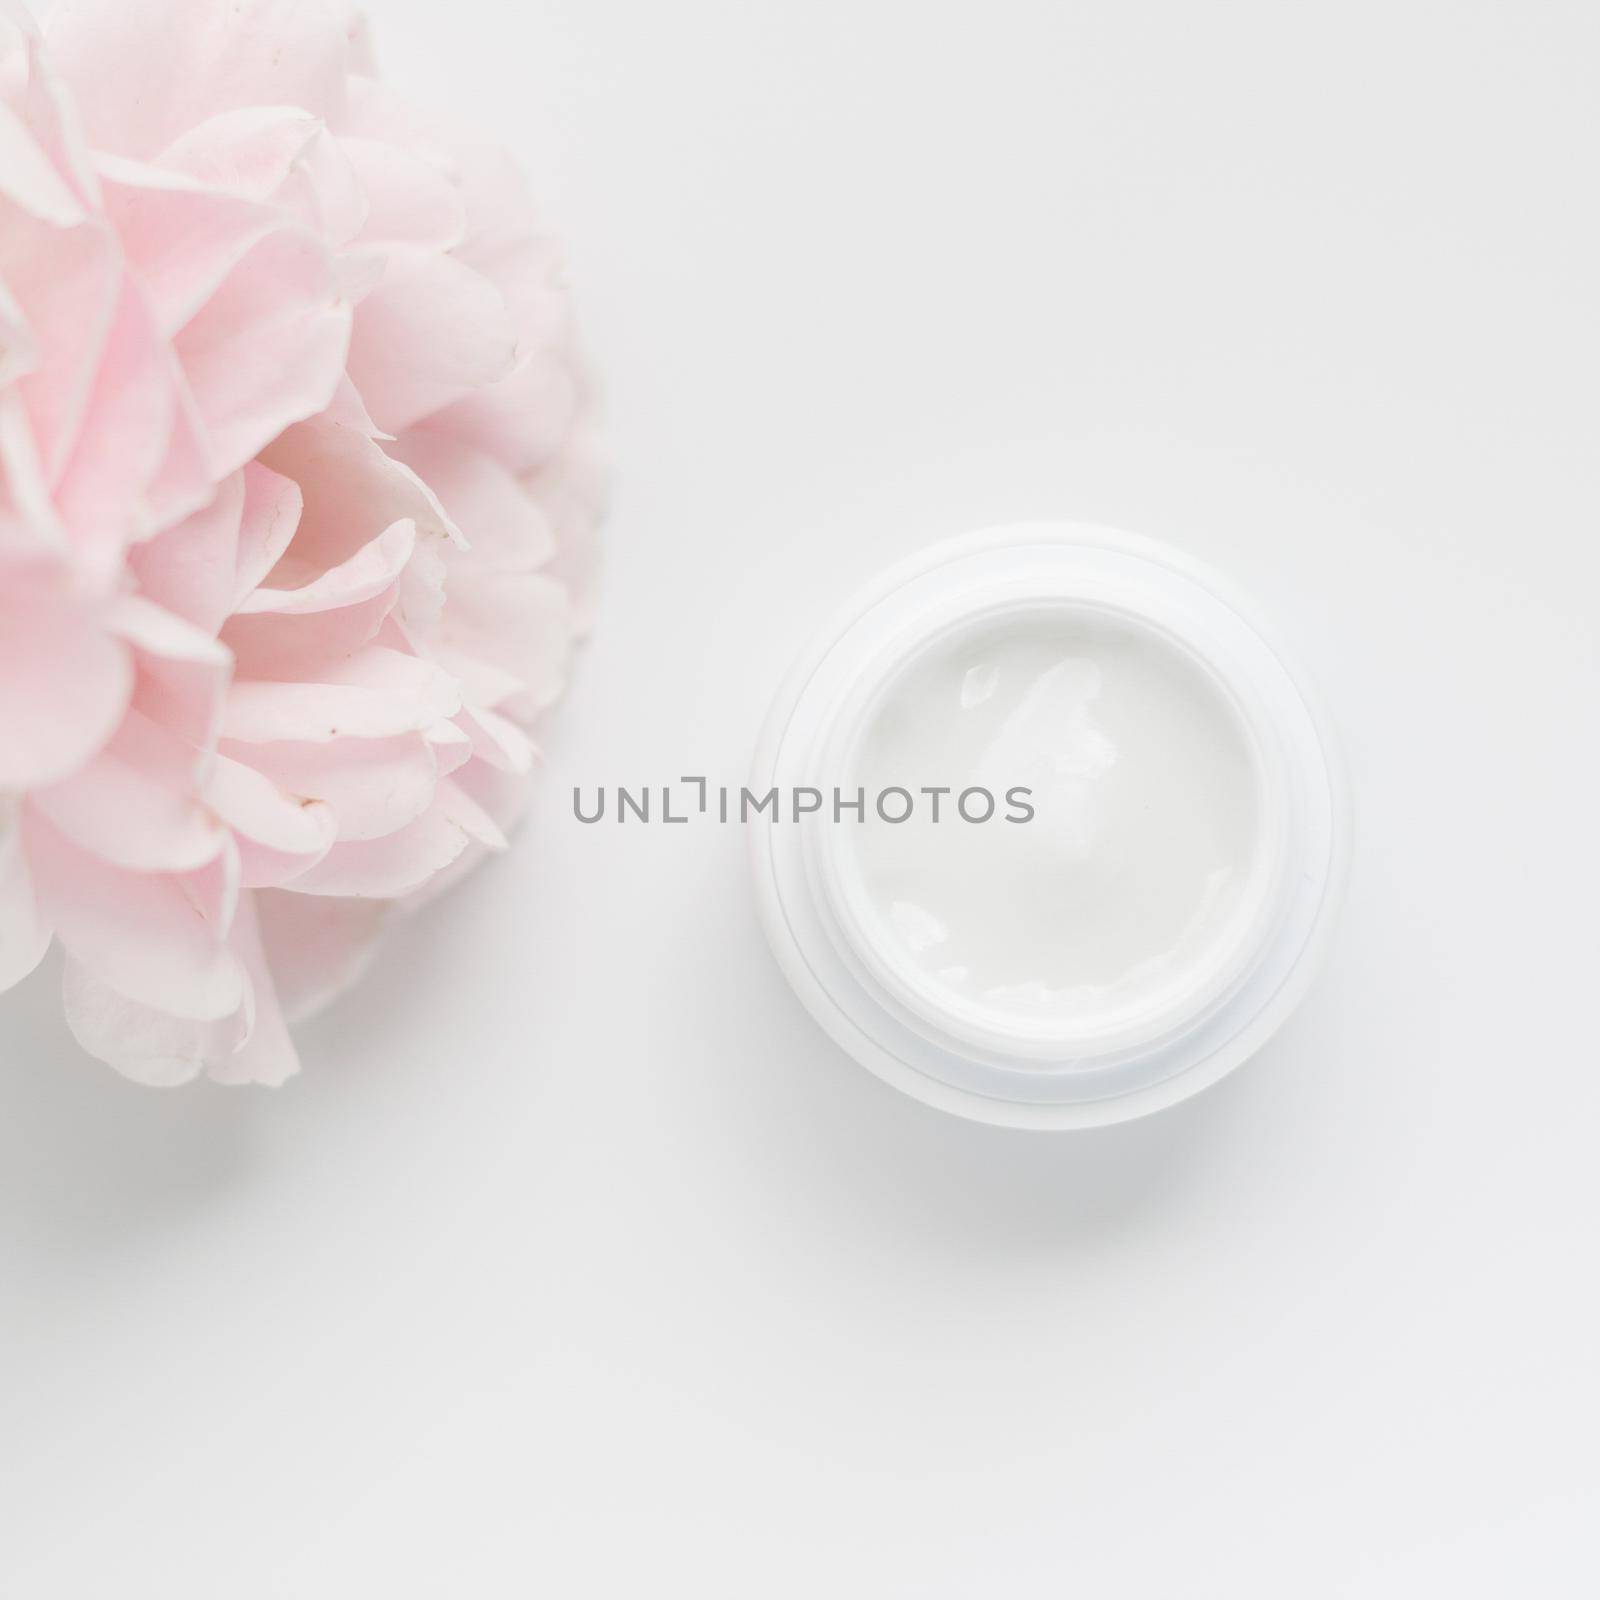 beauty cream jar and rose petals - cosmetics with flowers styled concept, elegant visuals